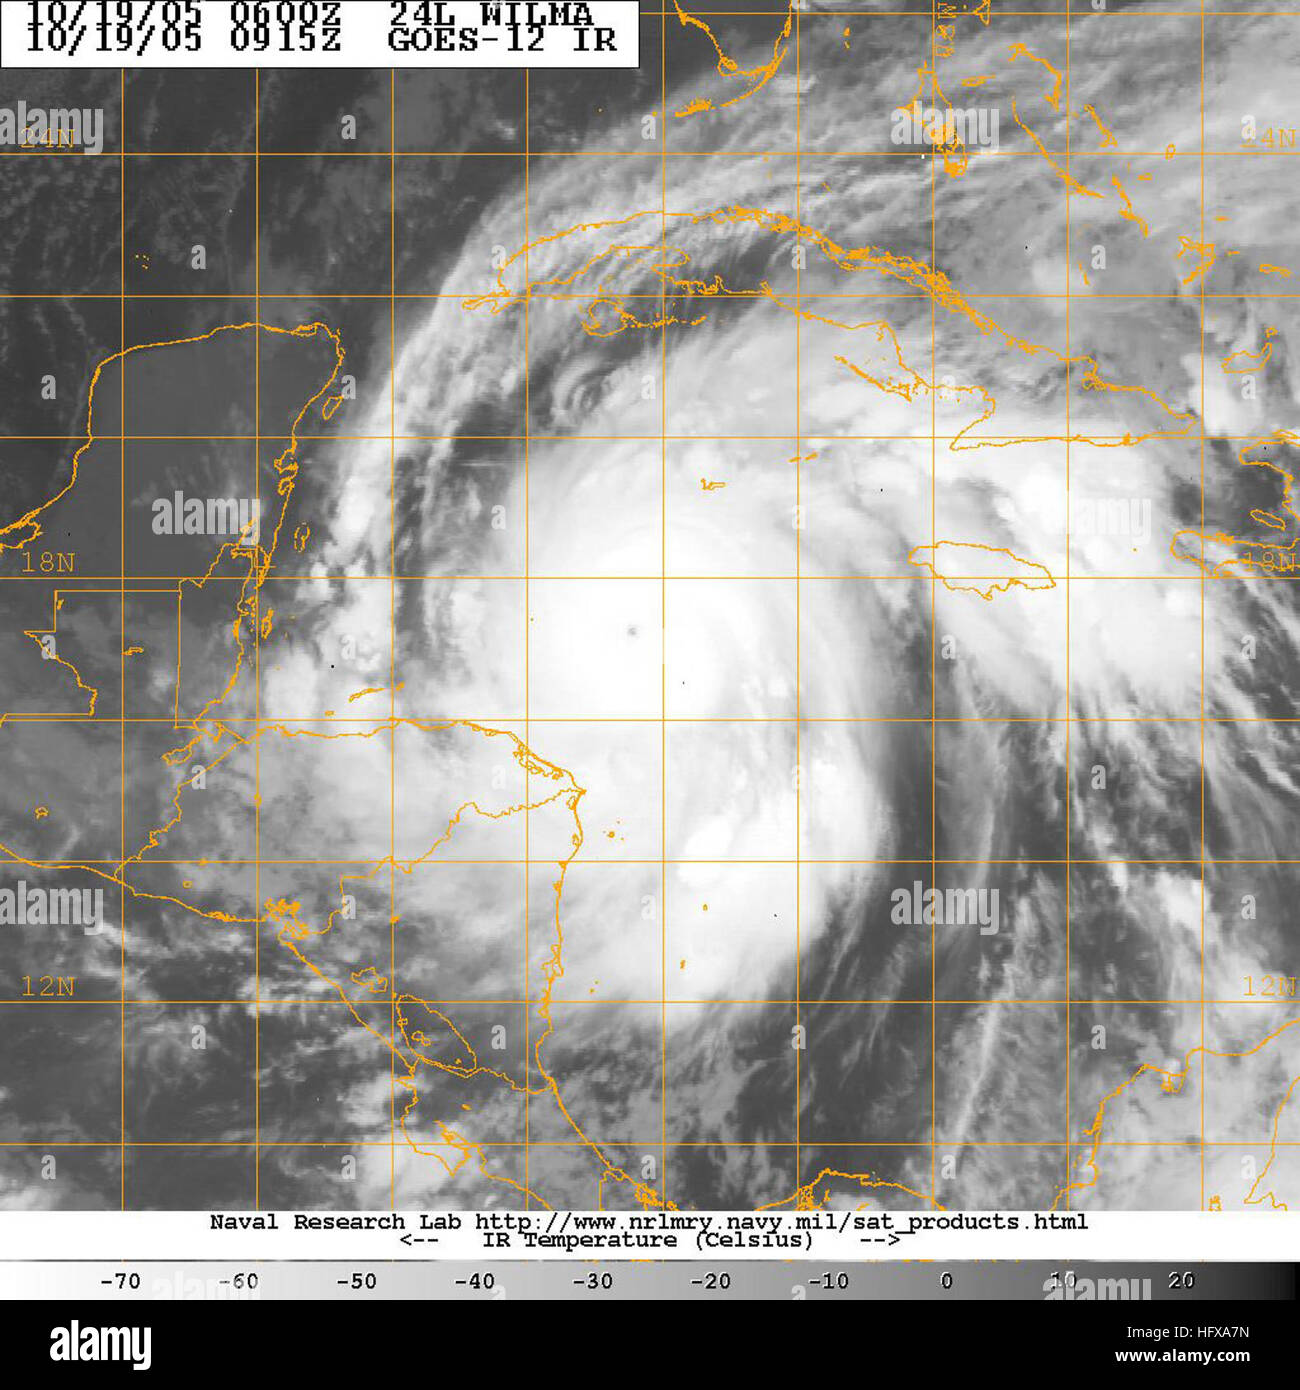 051019-N-1234W-001 Carribean Sea (Oct. 19, 2005) - Satellite image provided by the U.S. Naval Research Laboratory, Monterey, Calif., showing the status of Hurricane Wilma at approximately 4:15 am EST. An Air force reconnaissance plane reported a barometric pressure reading of 884 mb. This is the lowest minimum pressure ever measured in a hurricane in the Atlantic Basin. A hurricane watch remains in effect in Cuba. All interests in the Florida Keys and the Florida Peninsula should closely monitor the progress of extremely dangerous Hurricane Wilma. At 5 AM EDT 0900z the center of Wilma was loca Stock Photo